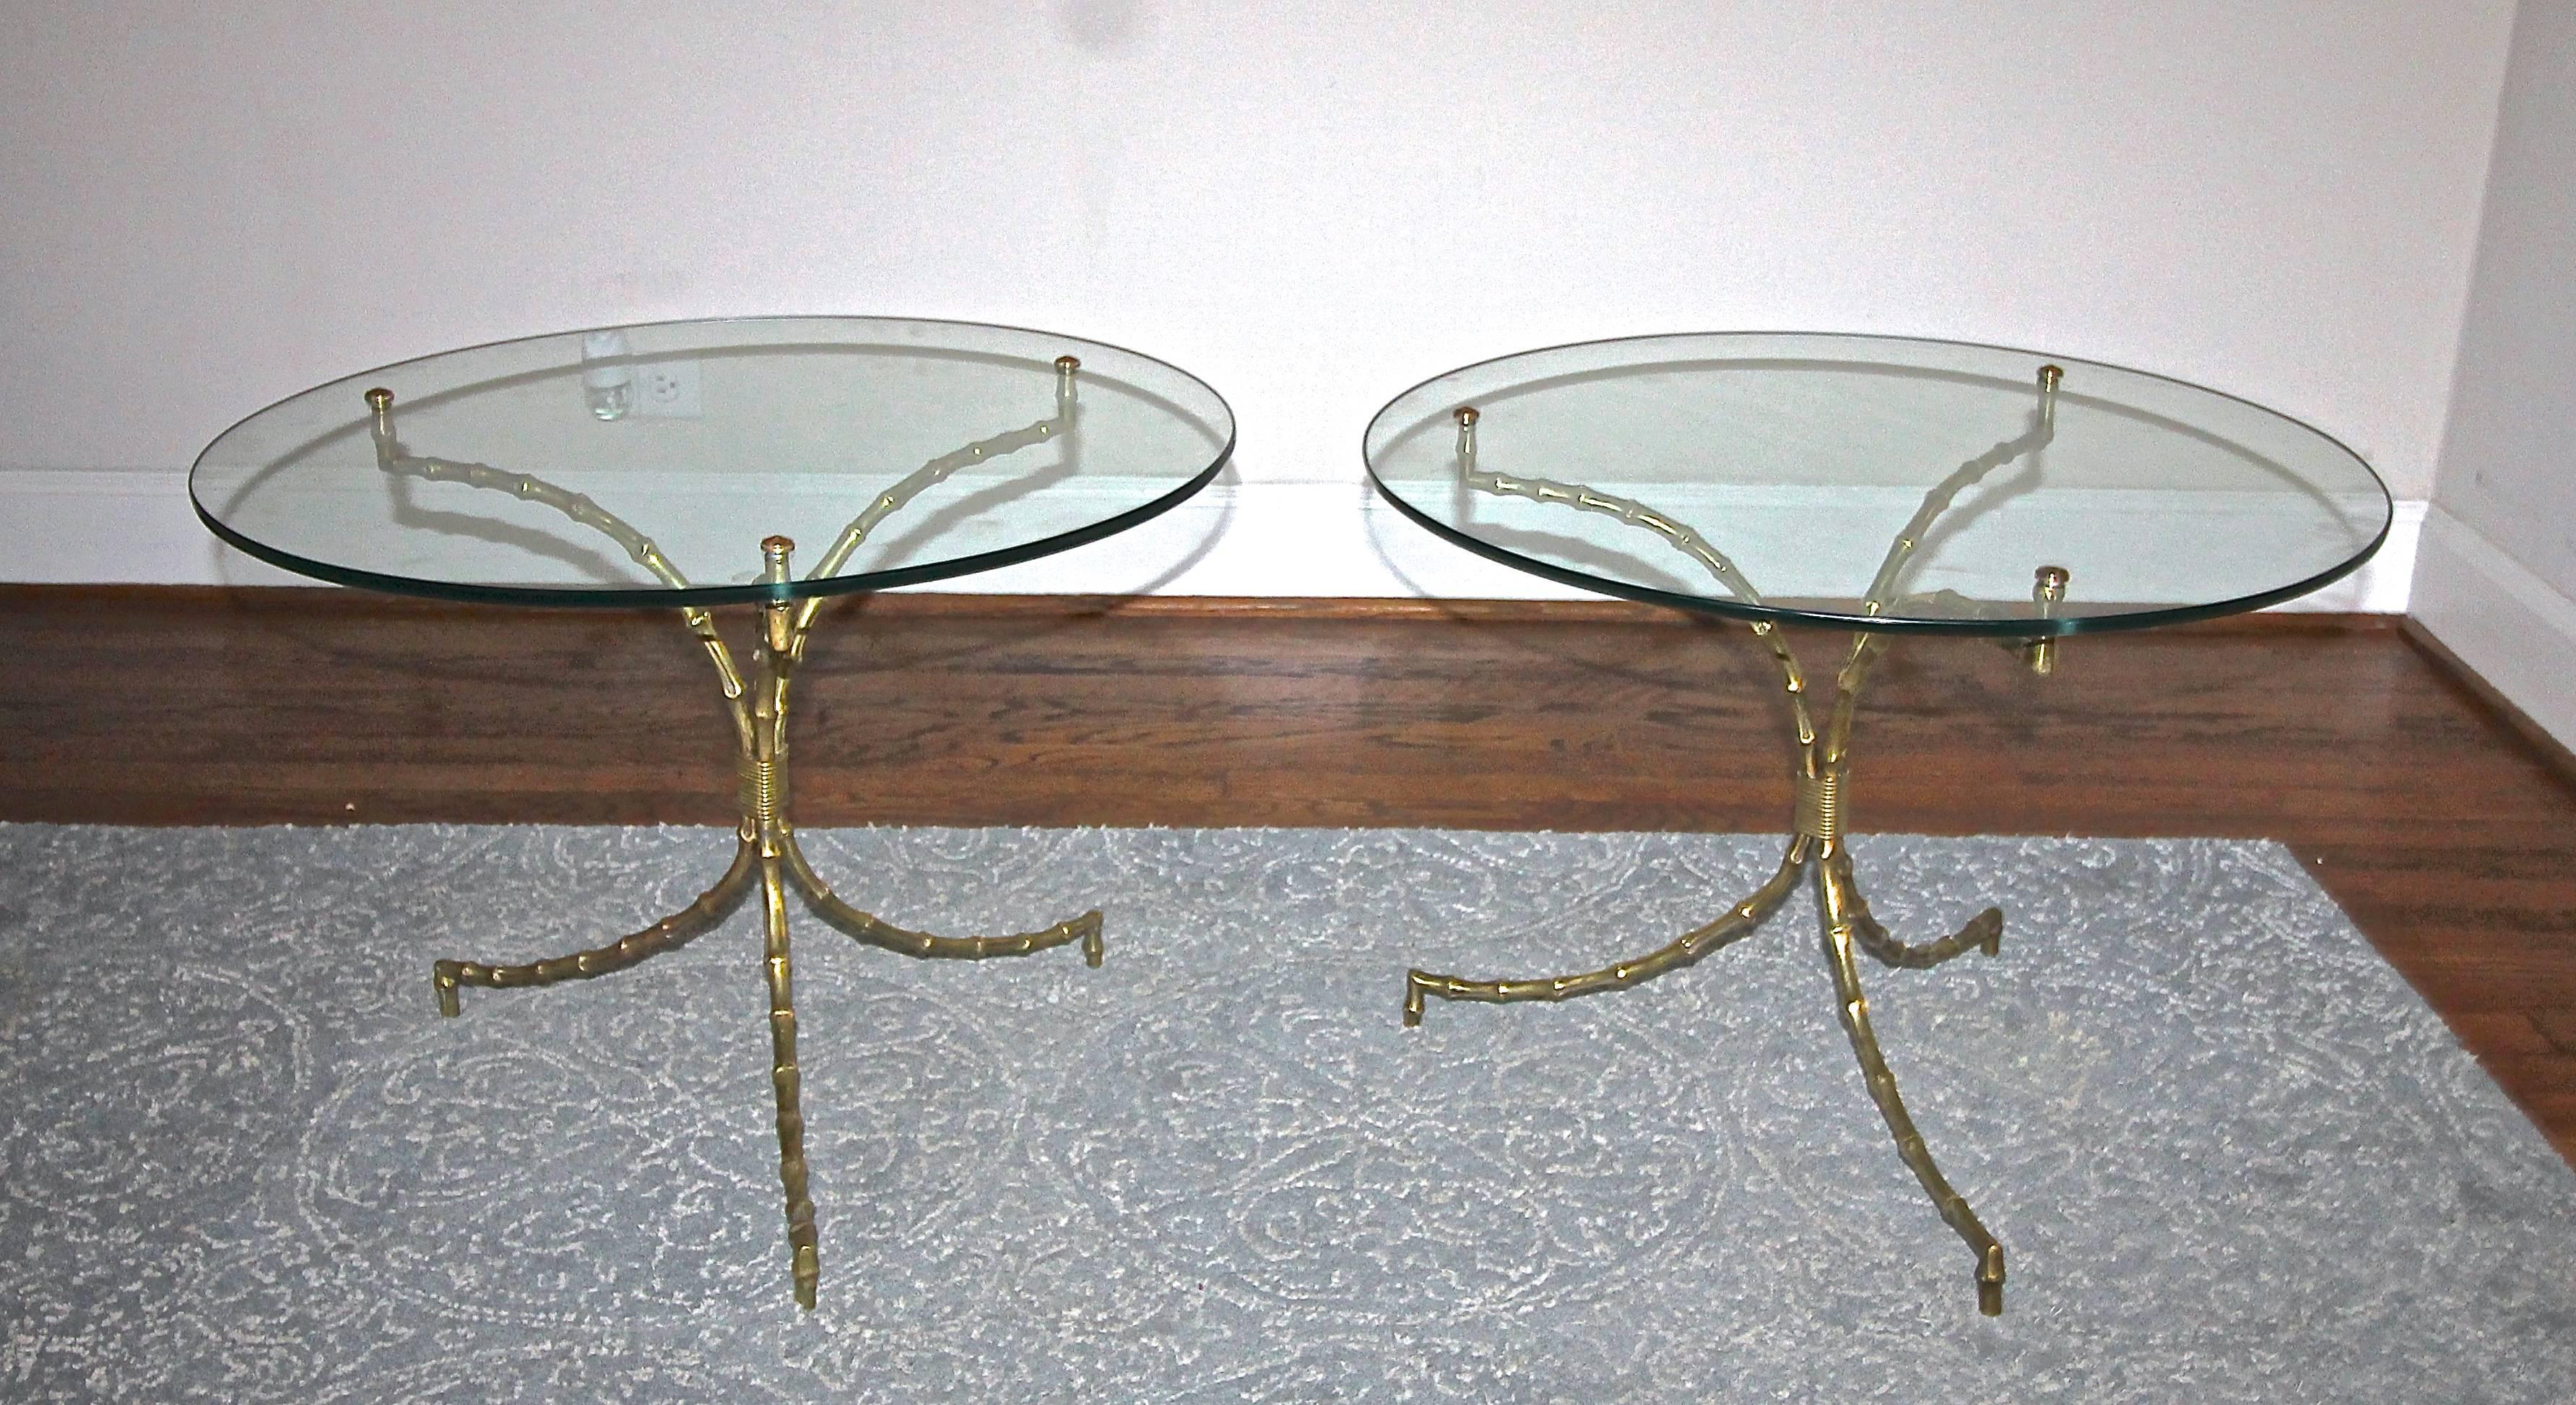 Pair of French Bagues style bronze faux bamboo tripod cocktail or side tables with attached round clear glass tops. The bronze bamboo is nicely detailed with an overall warm aged patina; glass is attached to frame with bronze cap attachments. The